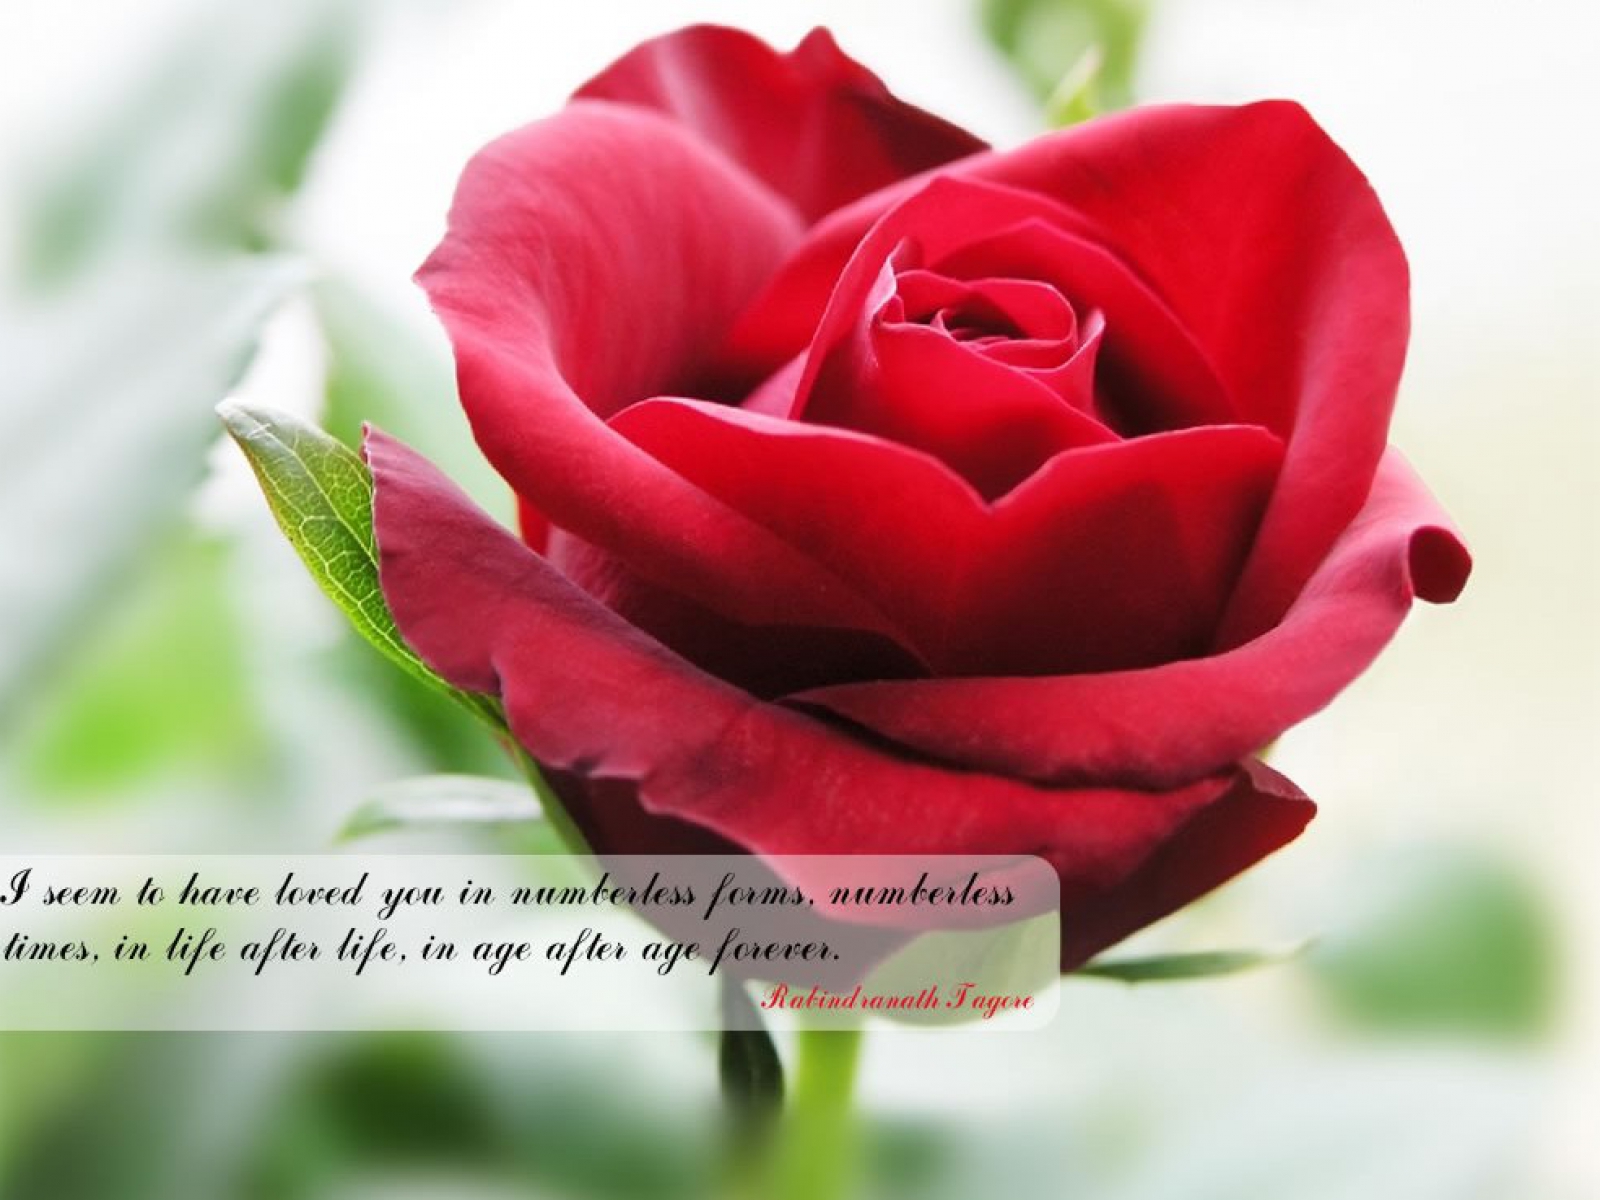 flowers wallpapers with quotes,flower,flowering plant,garden roses,rose,petal